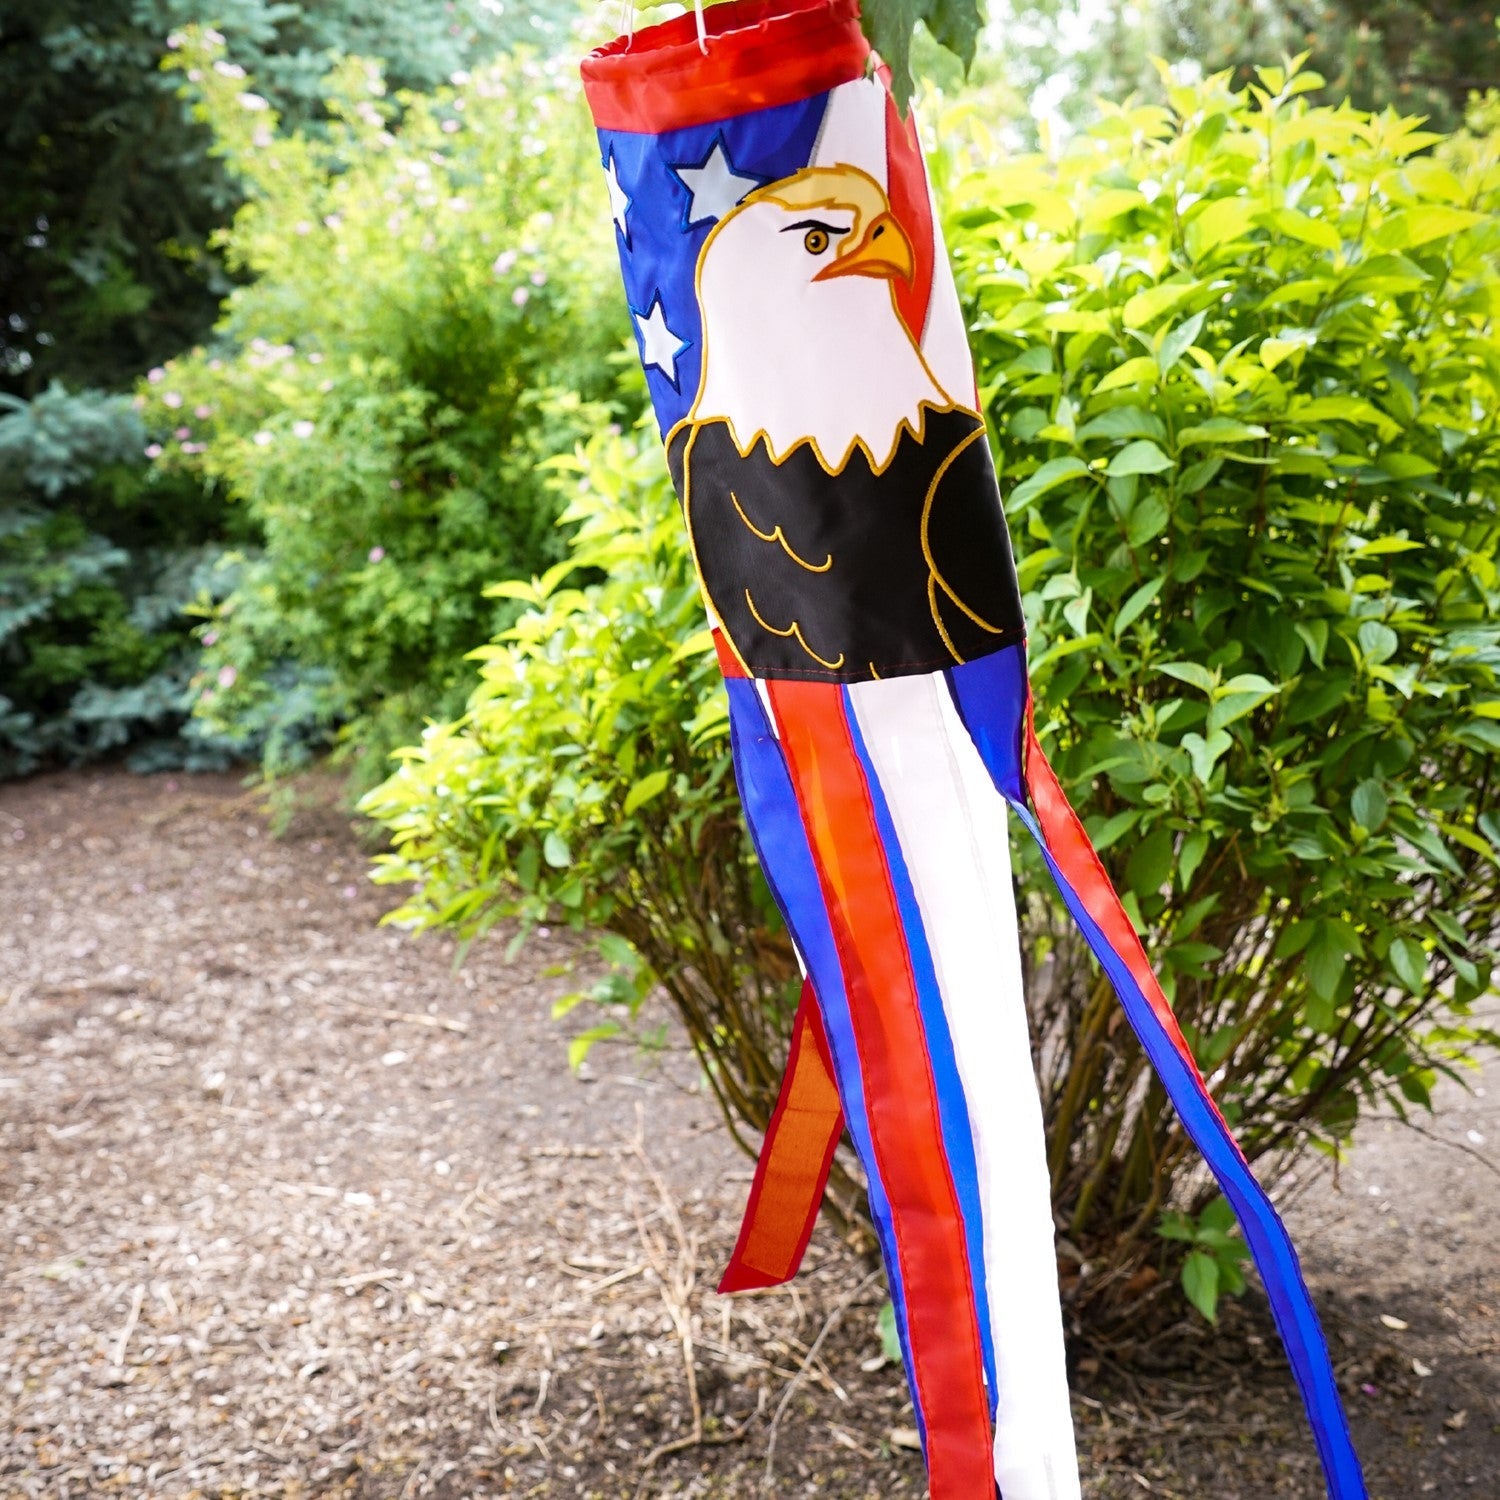 Patriotic Eagle Windsock with embroidered details and appliquéd finish